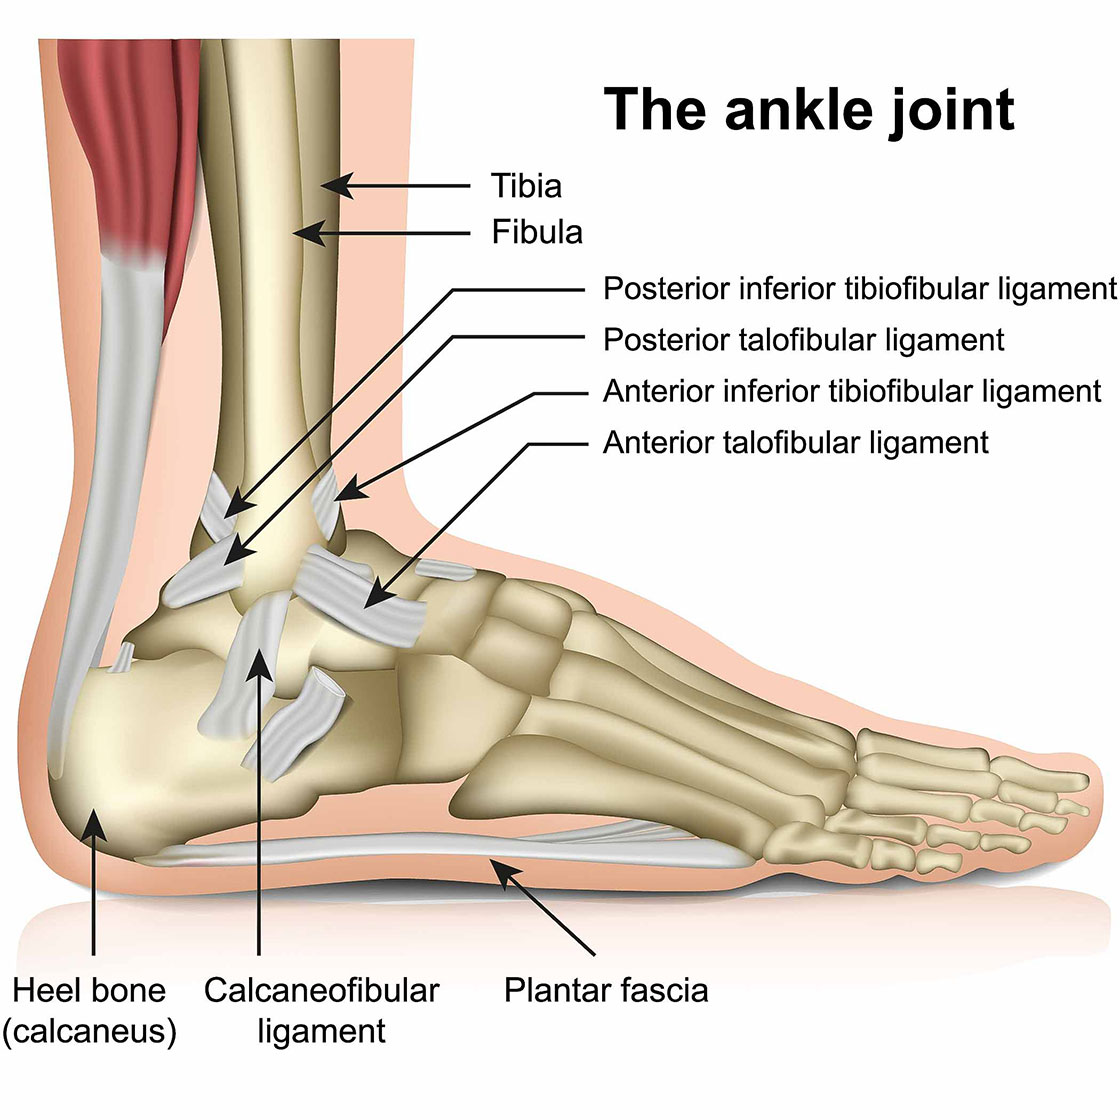 Depiction of the lateral ankle ligaments and structures.